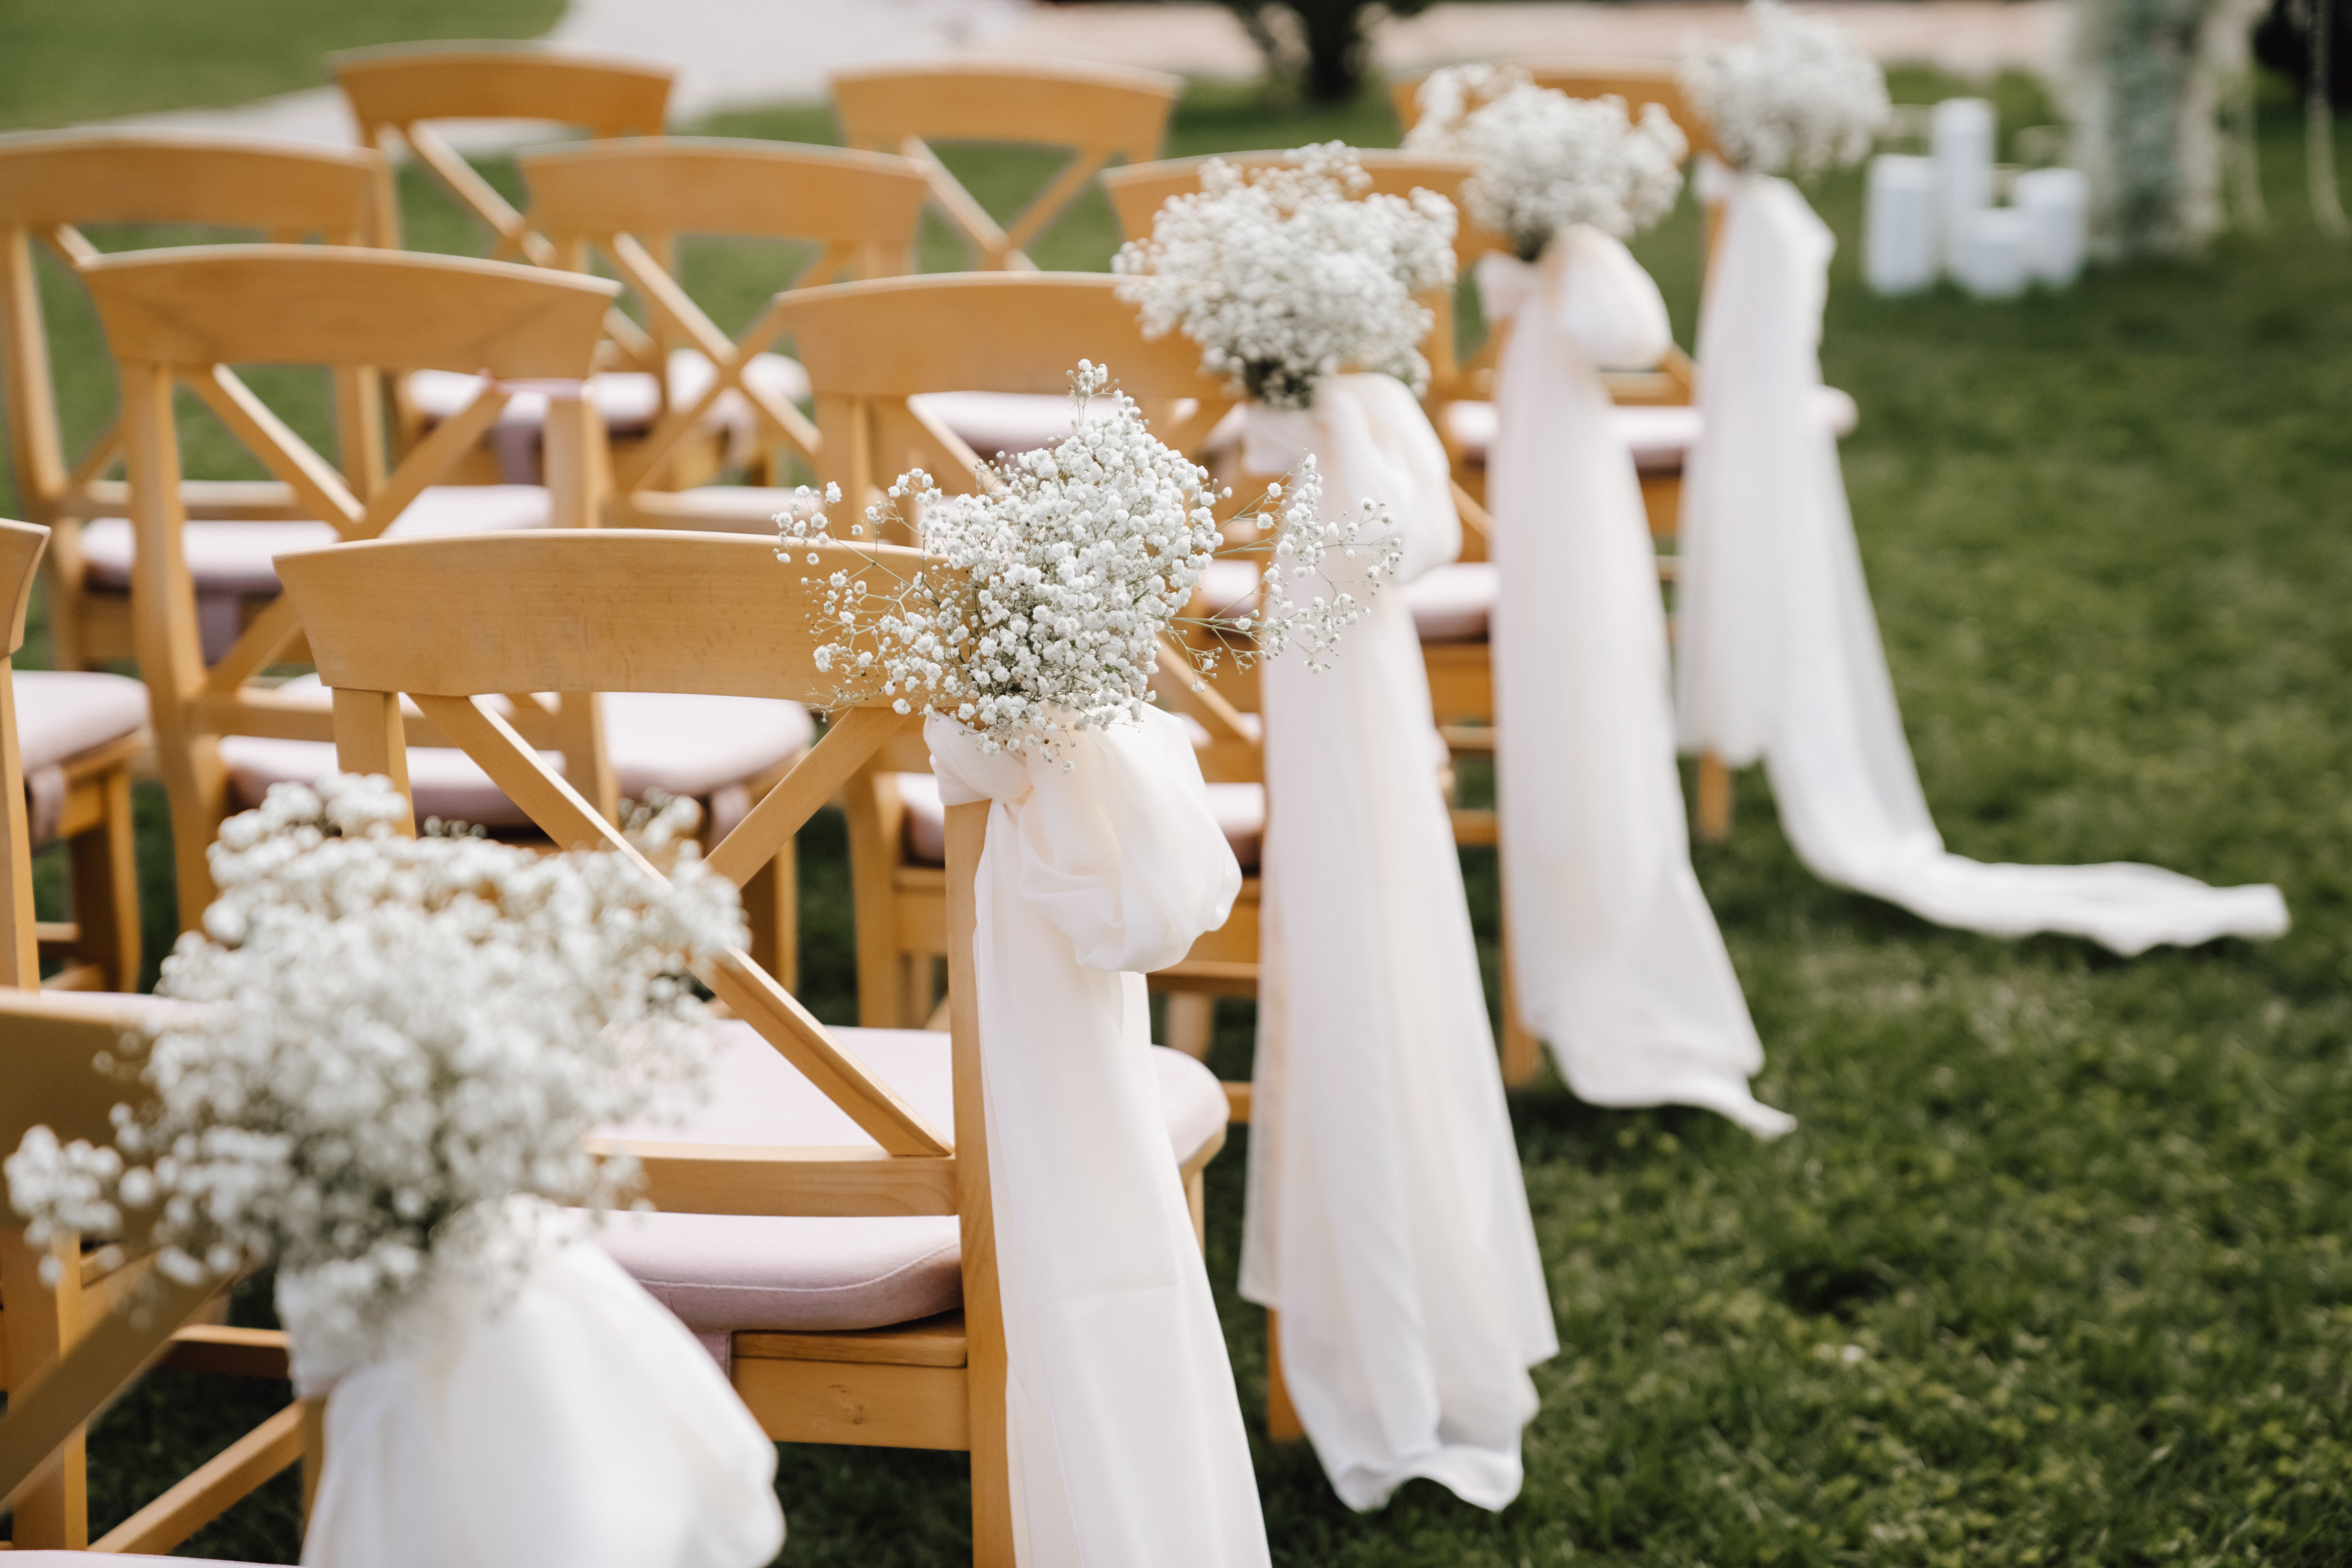 Chairs decorated during a wedding ceremony | Source: Shutterstock